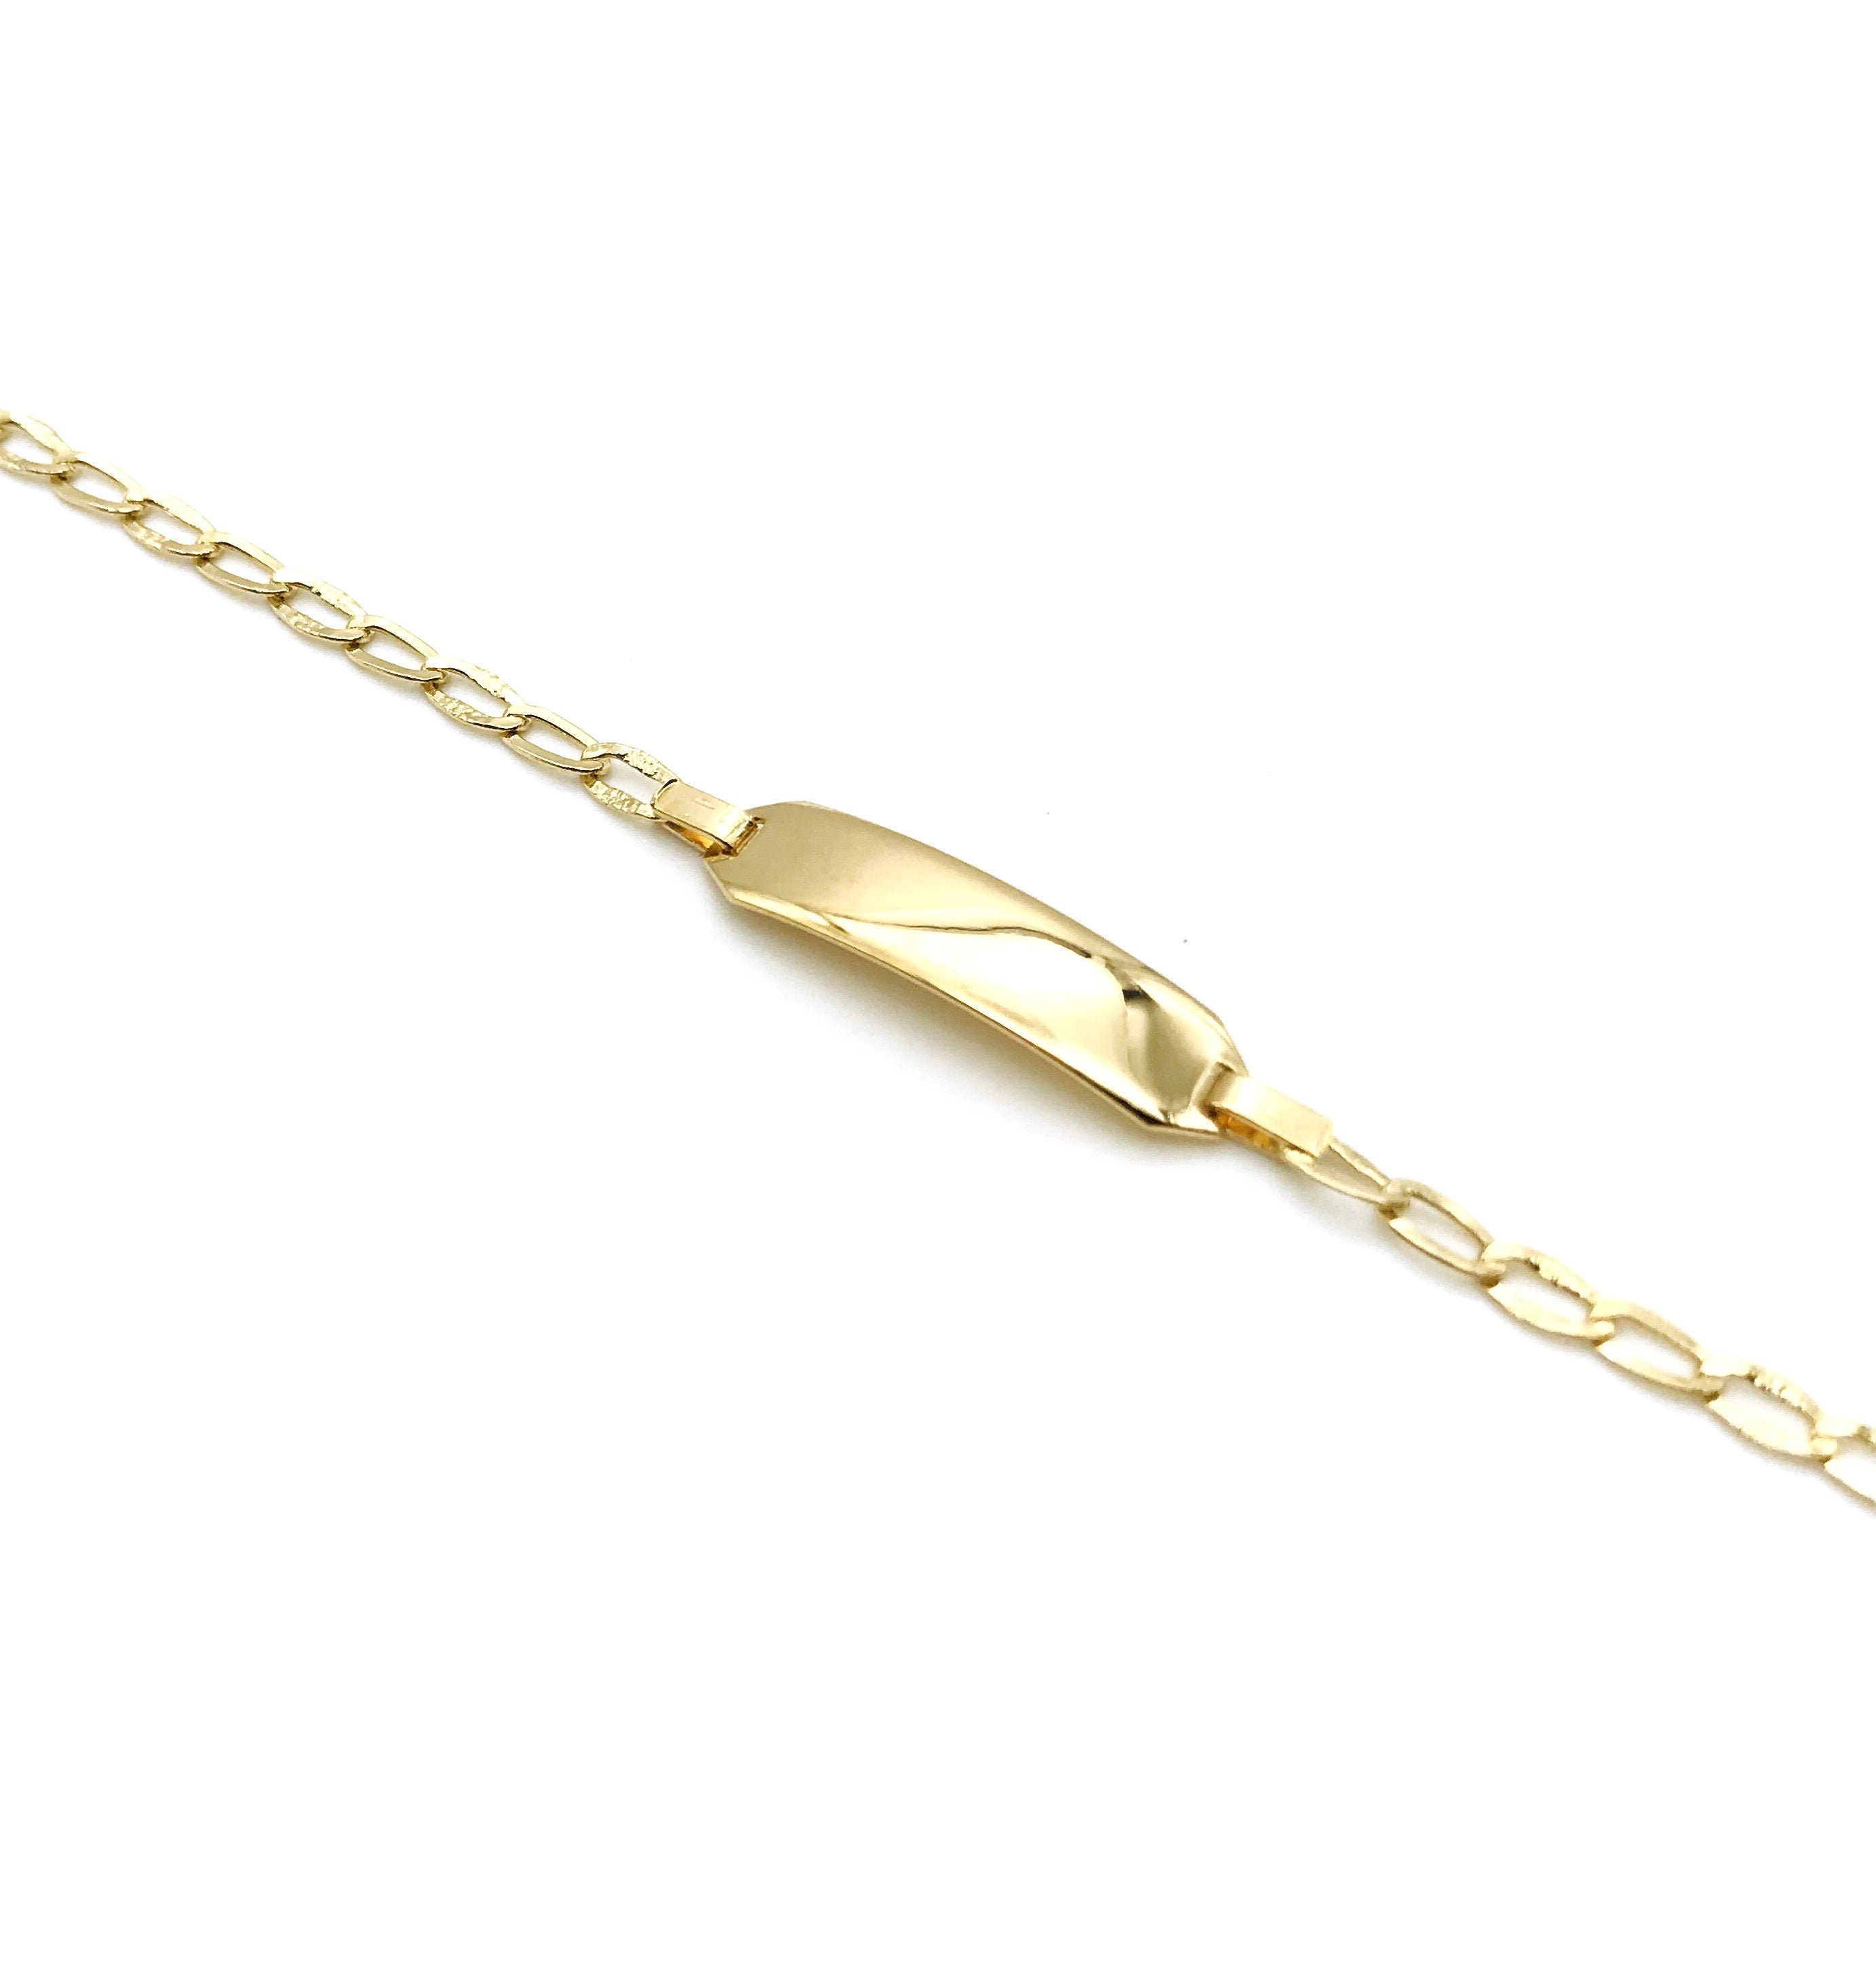 18K Yellow Gold Customizable Bracelet For Ladies & Childs - Free Engraving Gift Box Solid Handmade Made in Italy